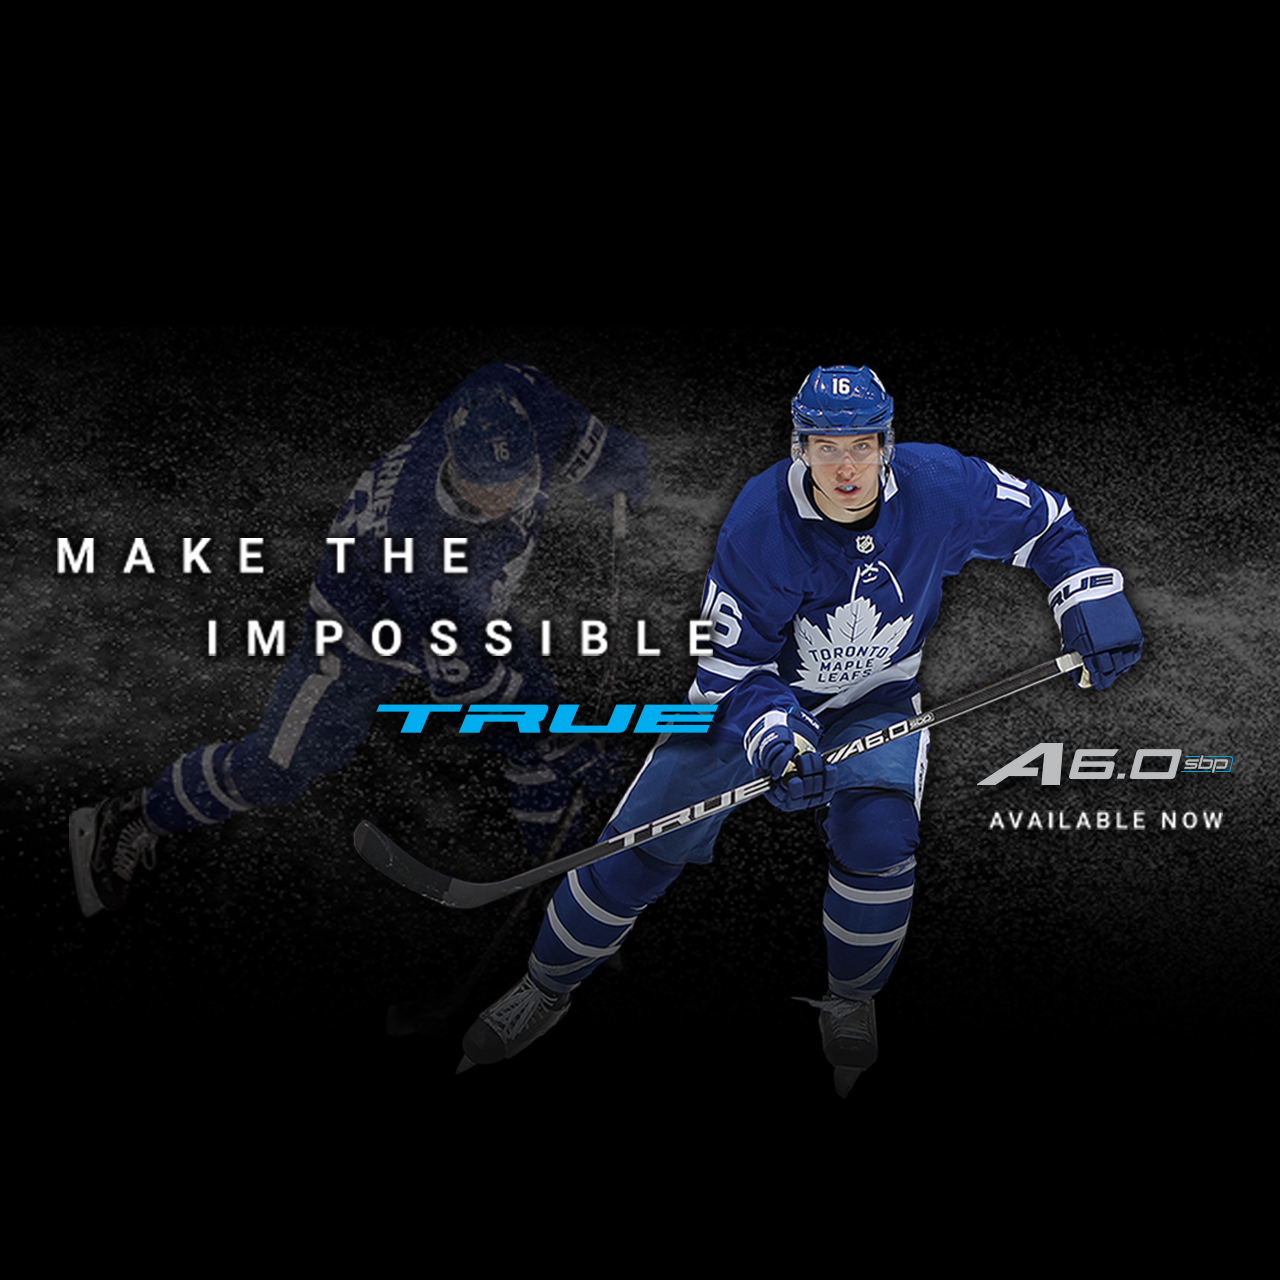 Make the Impossible TRUE banner with Mitch Marner